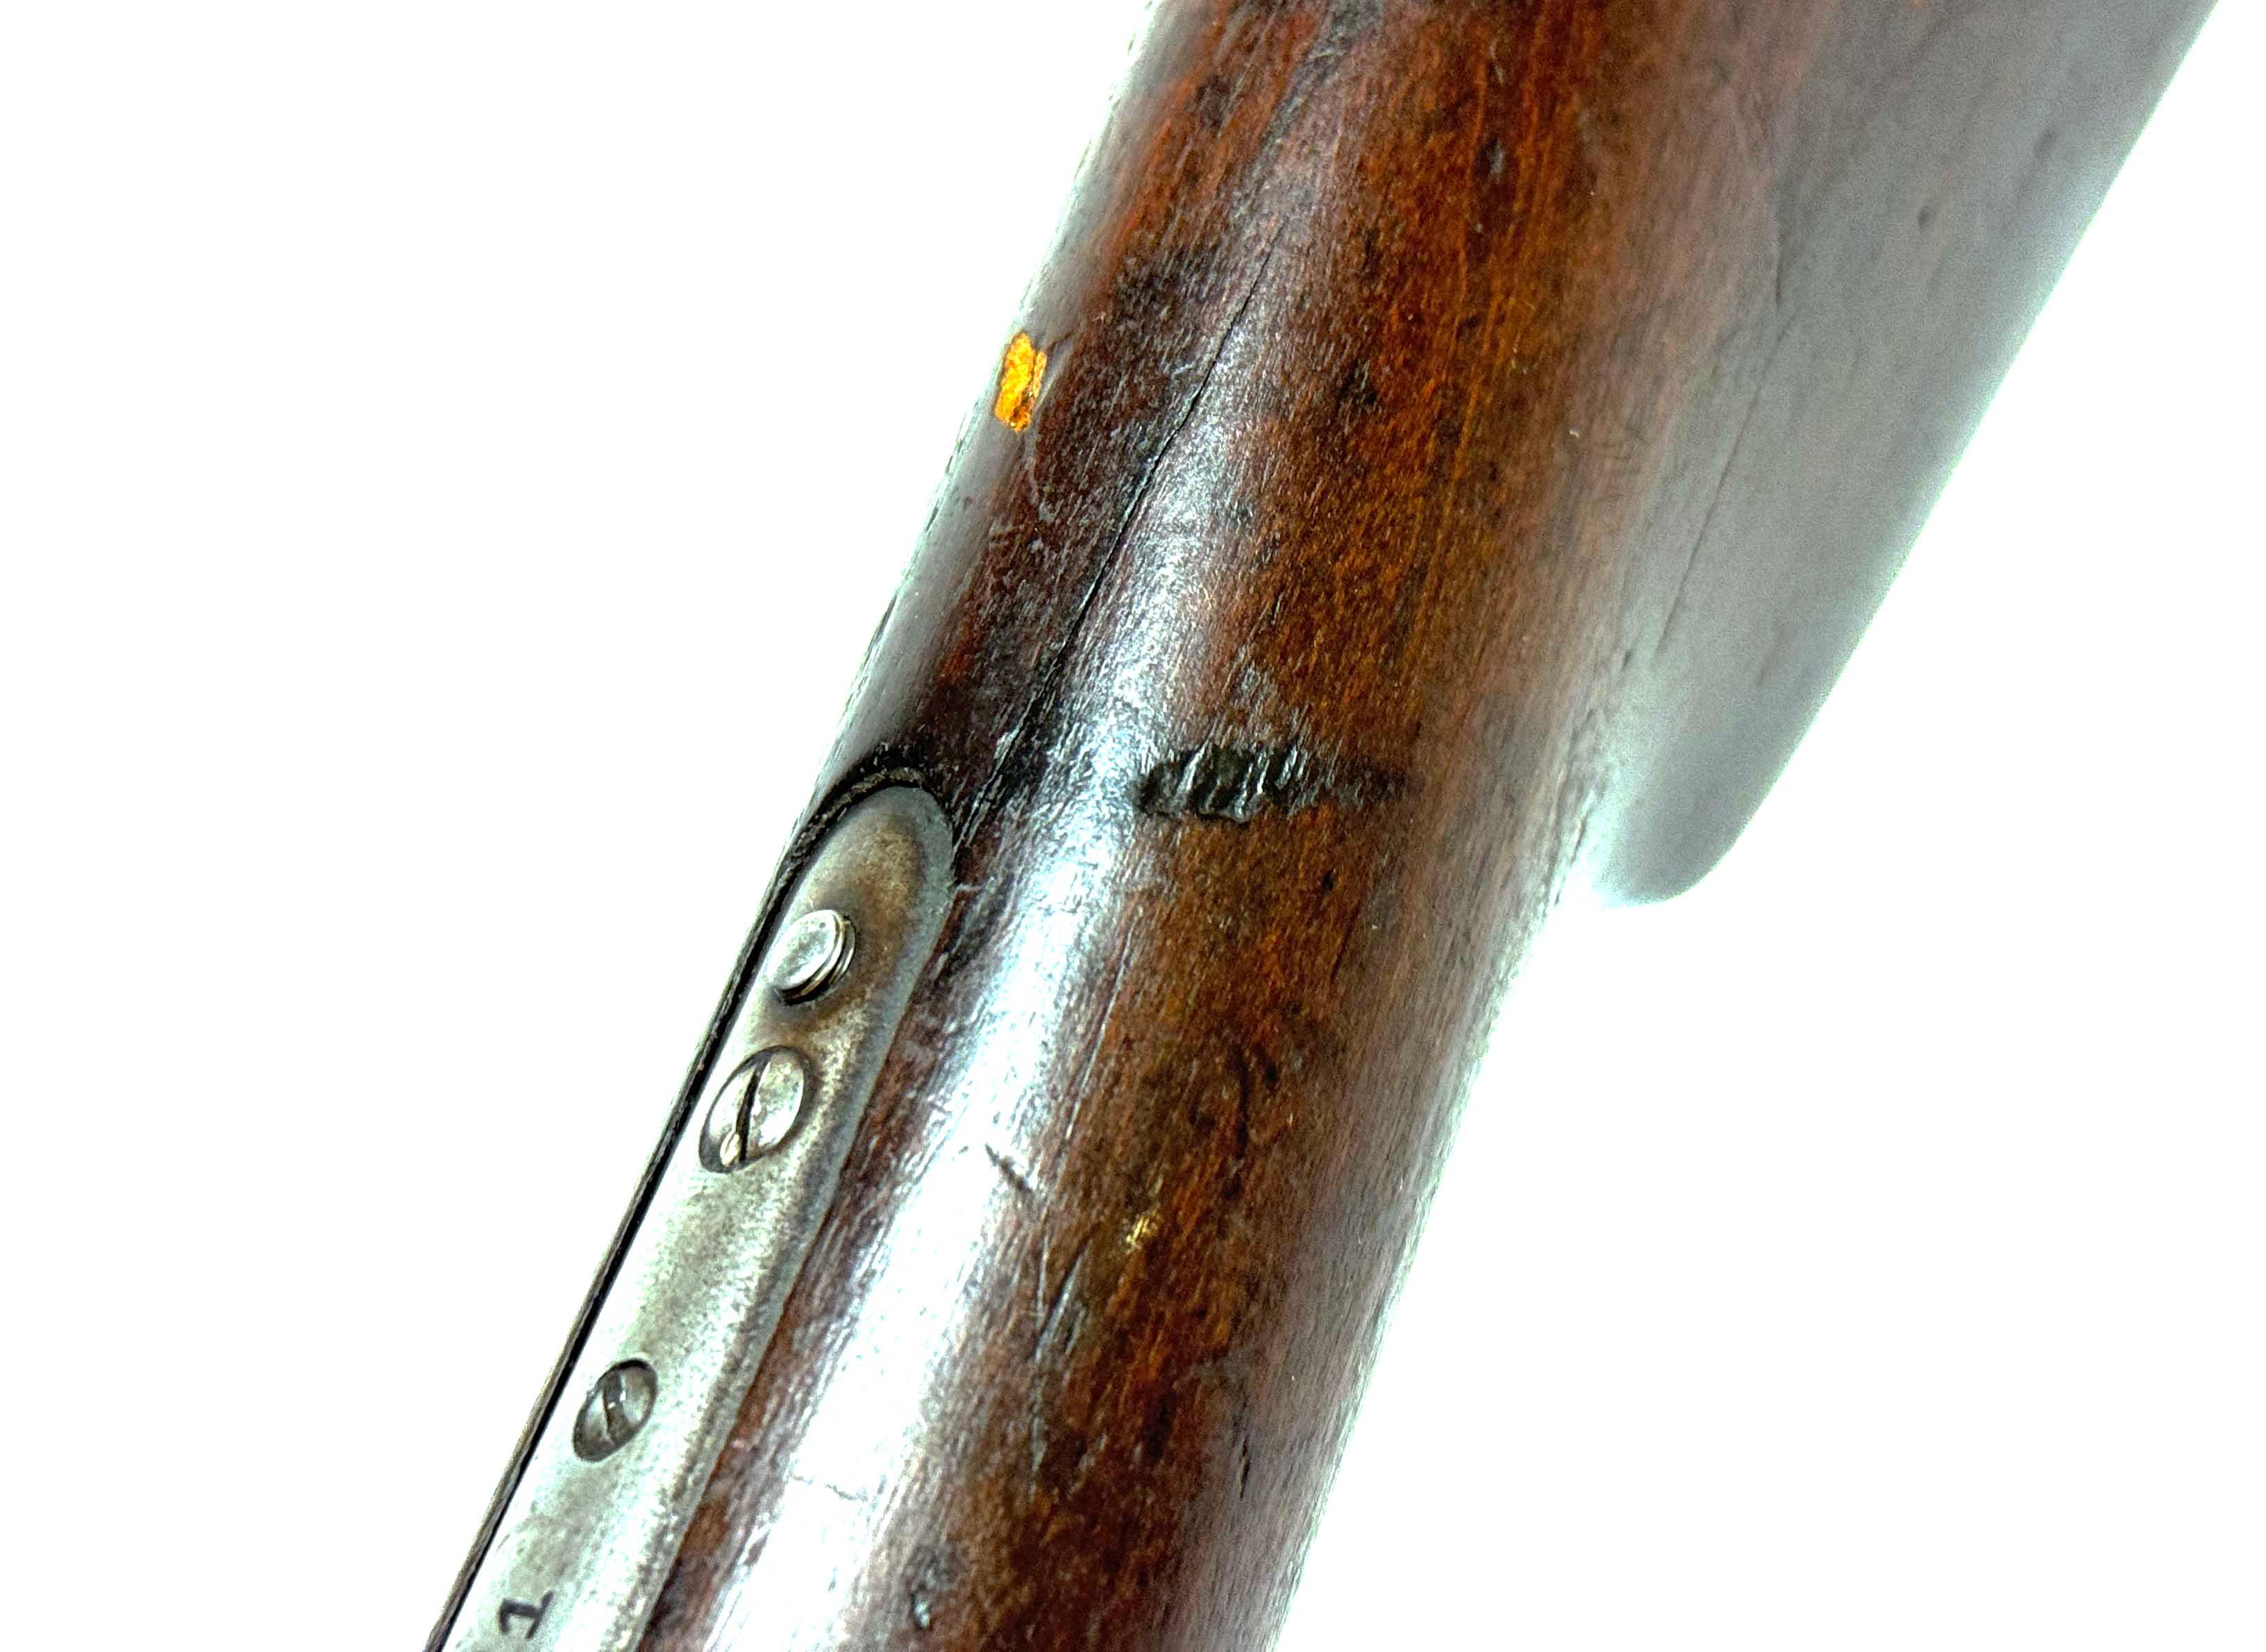 1916 Winchester Model 1890 .22 Cal. Smooth Bore Carnival "Gallery Gun" Pump Action Takedown Rifle